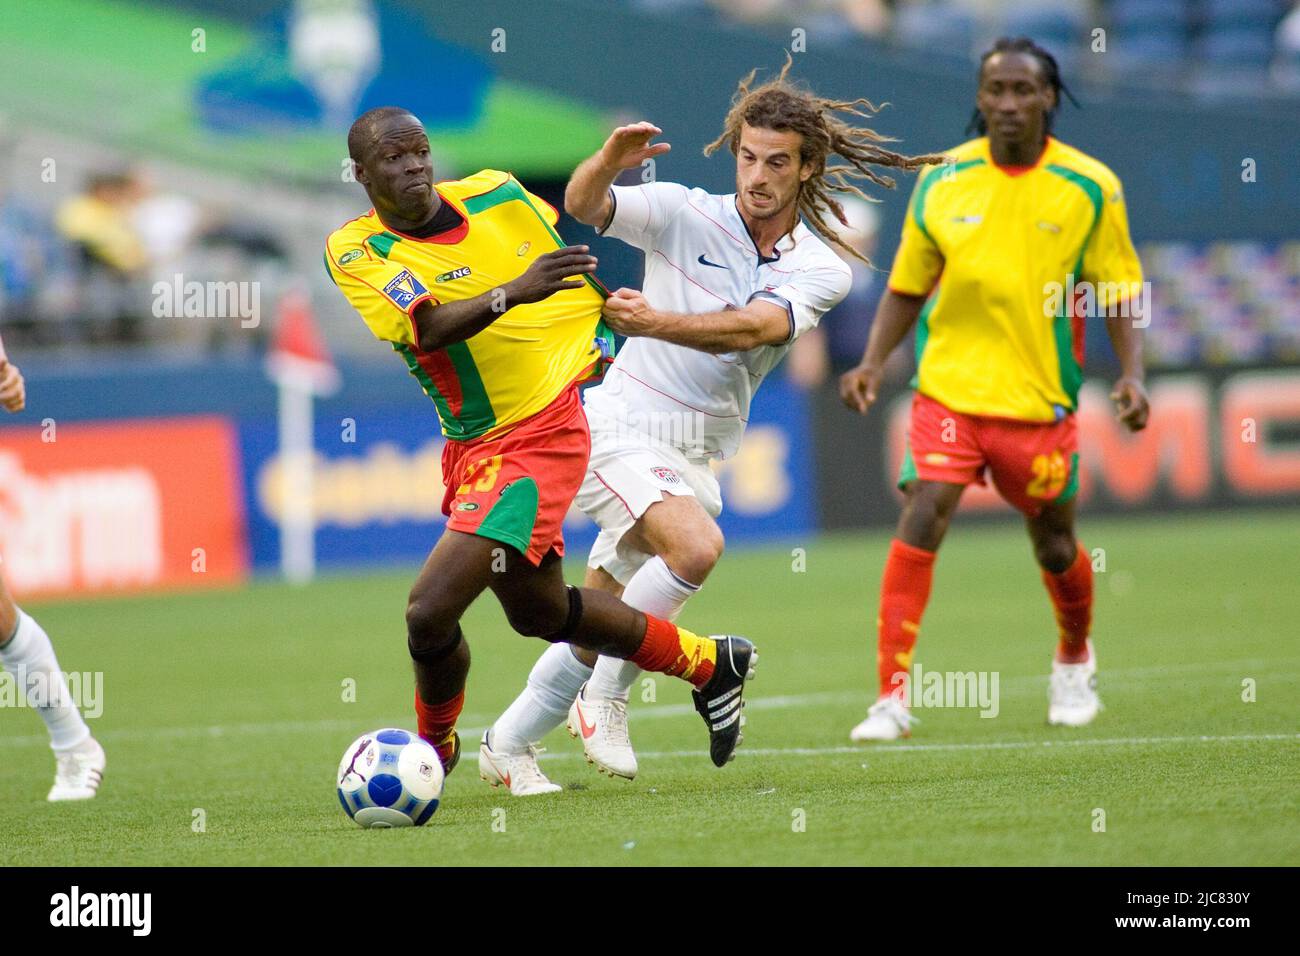 Seattle, Washington, USA. 04th July, 2009. 04 July 2009: Patrick Modeste (23) trying to escape the grasp of Kyle Beckerman (5). Gold Cup 2009, Grenada vs. United States at Qwest Field in Seattle, WA. (Credit Image: © Andrew Fredrickson/Southcreek Global/ZUMApress.com) Stock Photo